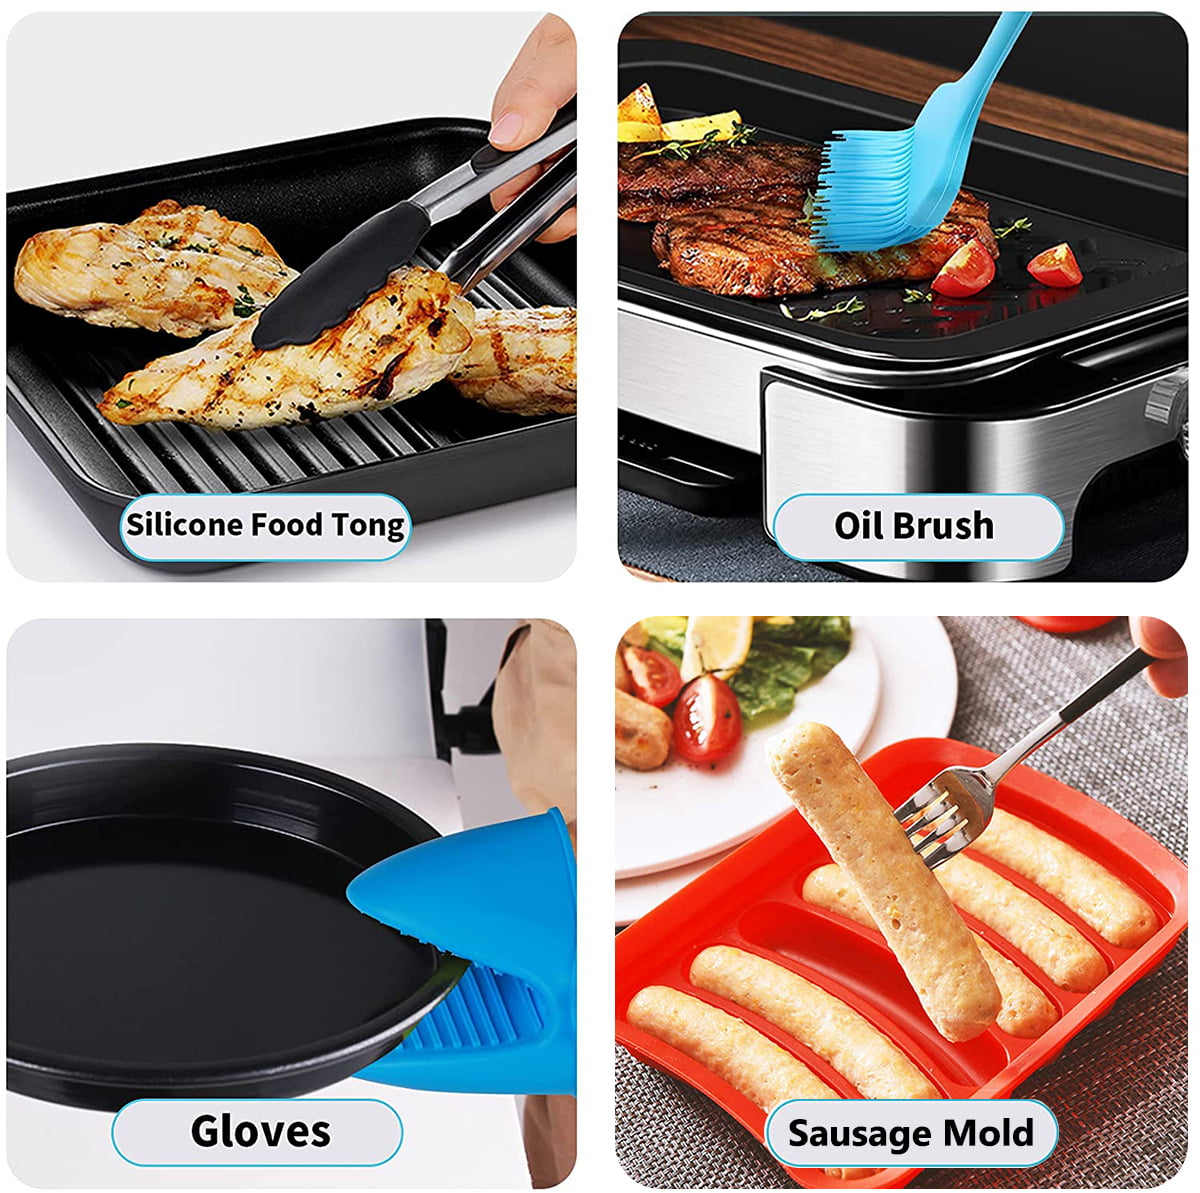 9PC Dual Air Fryer Accessories Rack Pizza Oven Barbecue Frying Pan